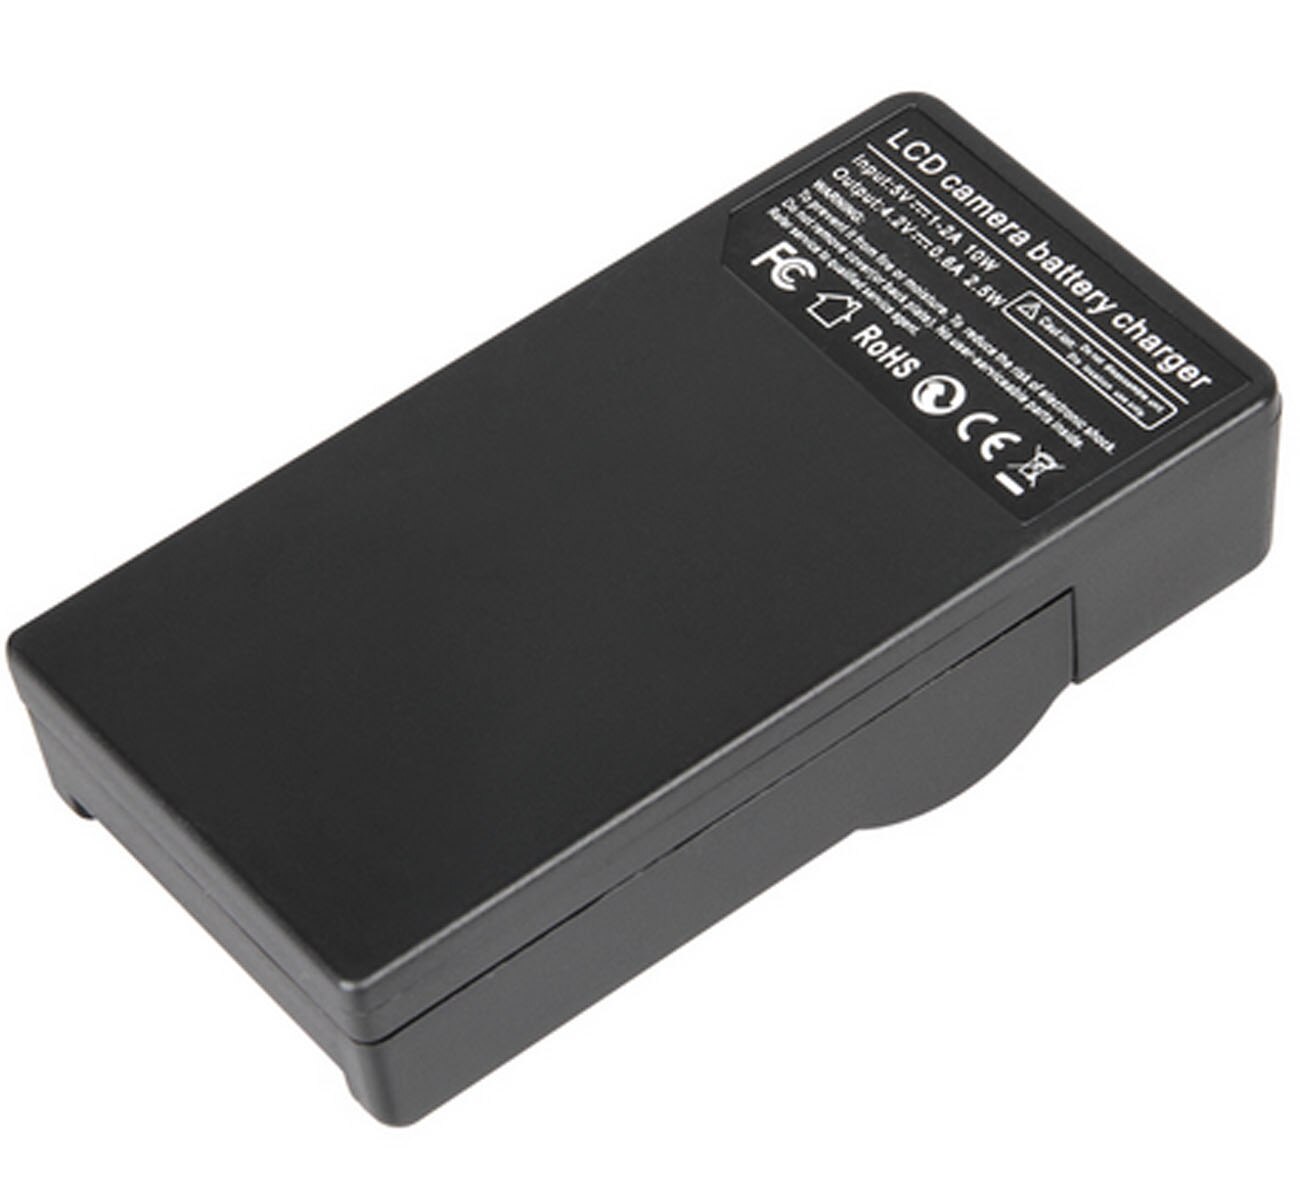 Batterij Lader Voor Nikon Coolpix AW110s, AW120s, AW130s, W300, B600, A900, A1000 Digitale Camera